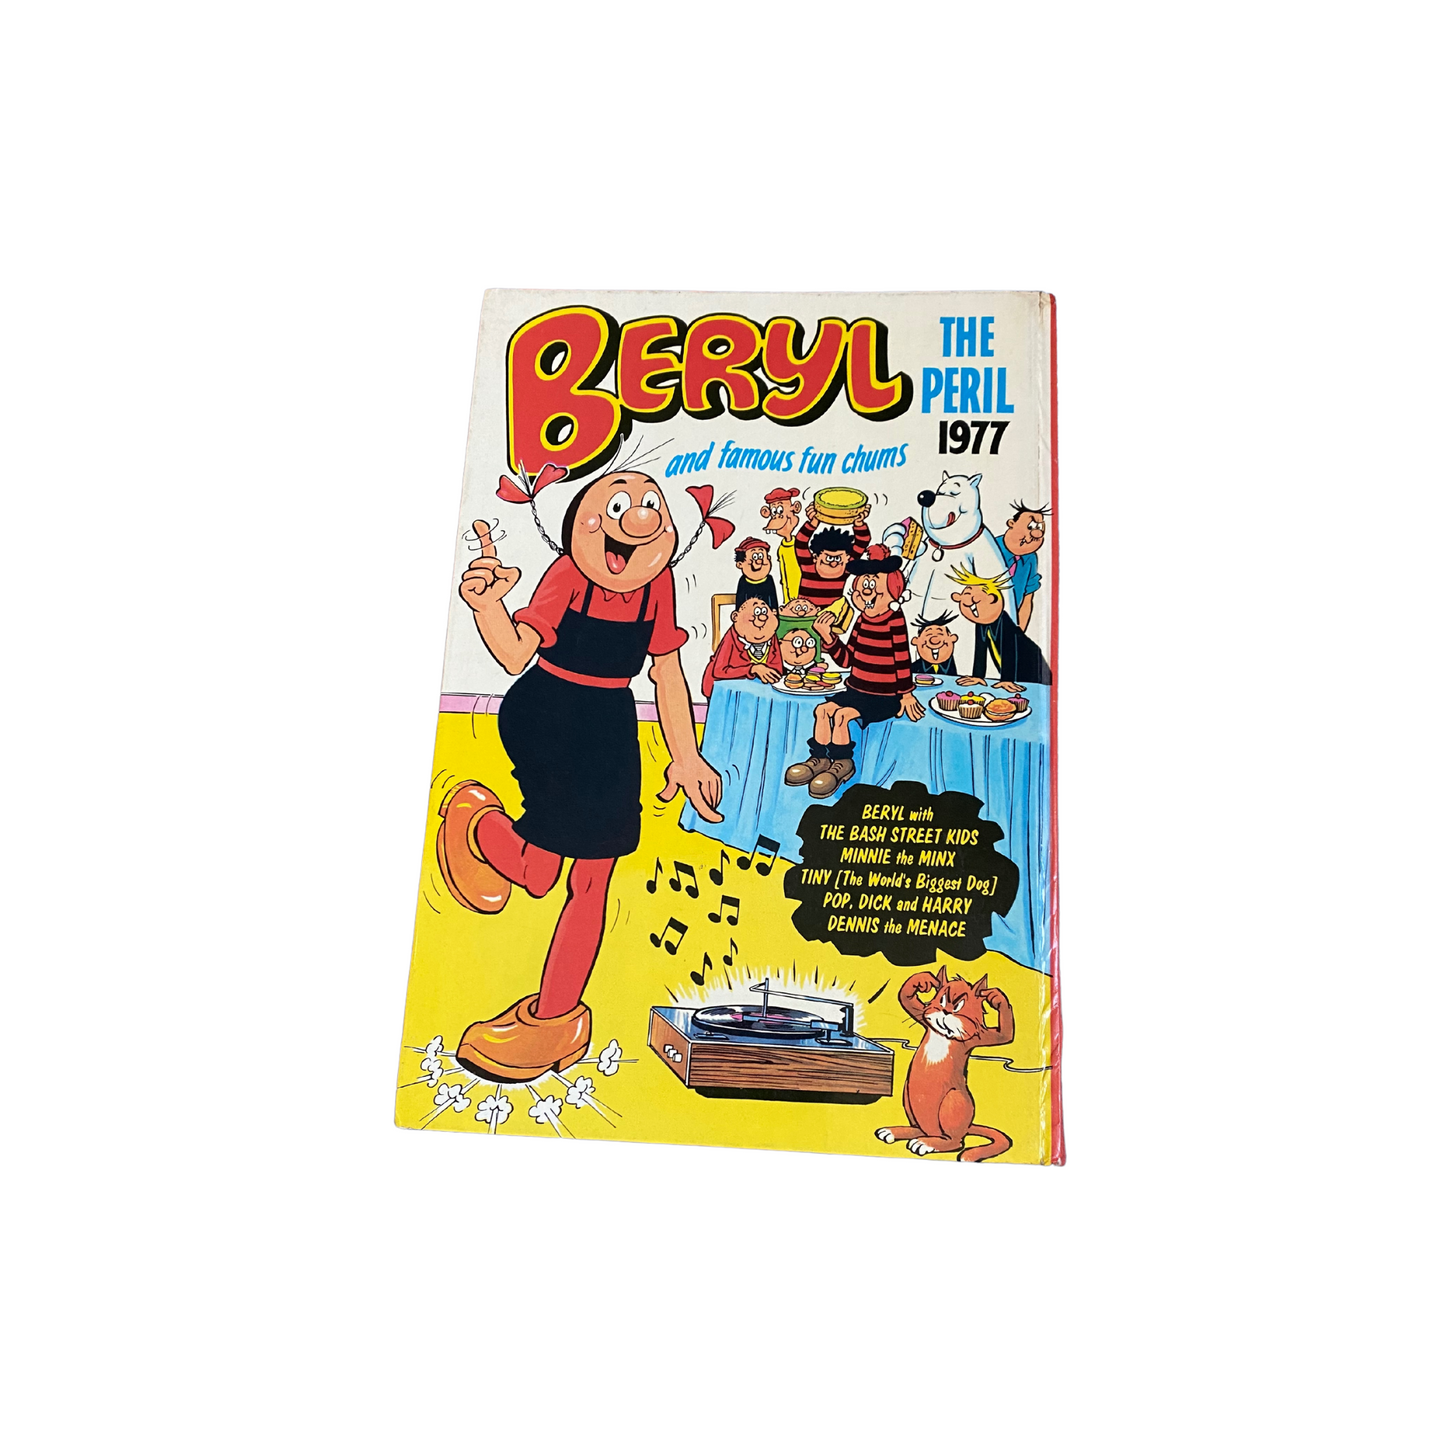 Vintage Beryl the Peril and famous fun chums annual 1977. Great nostalgic gift idea